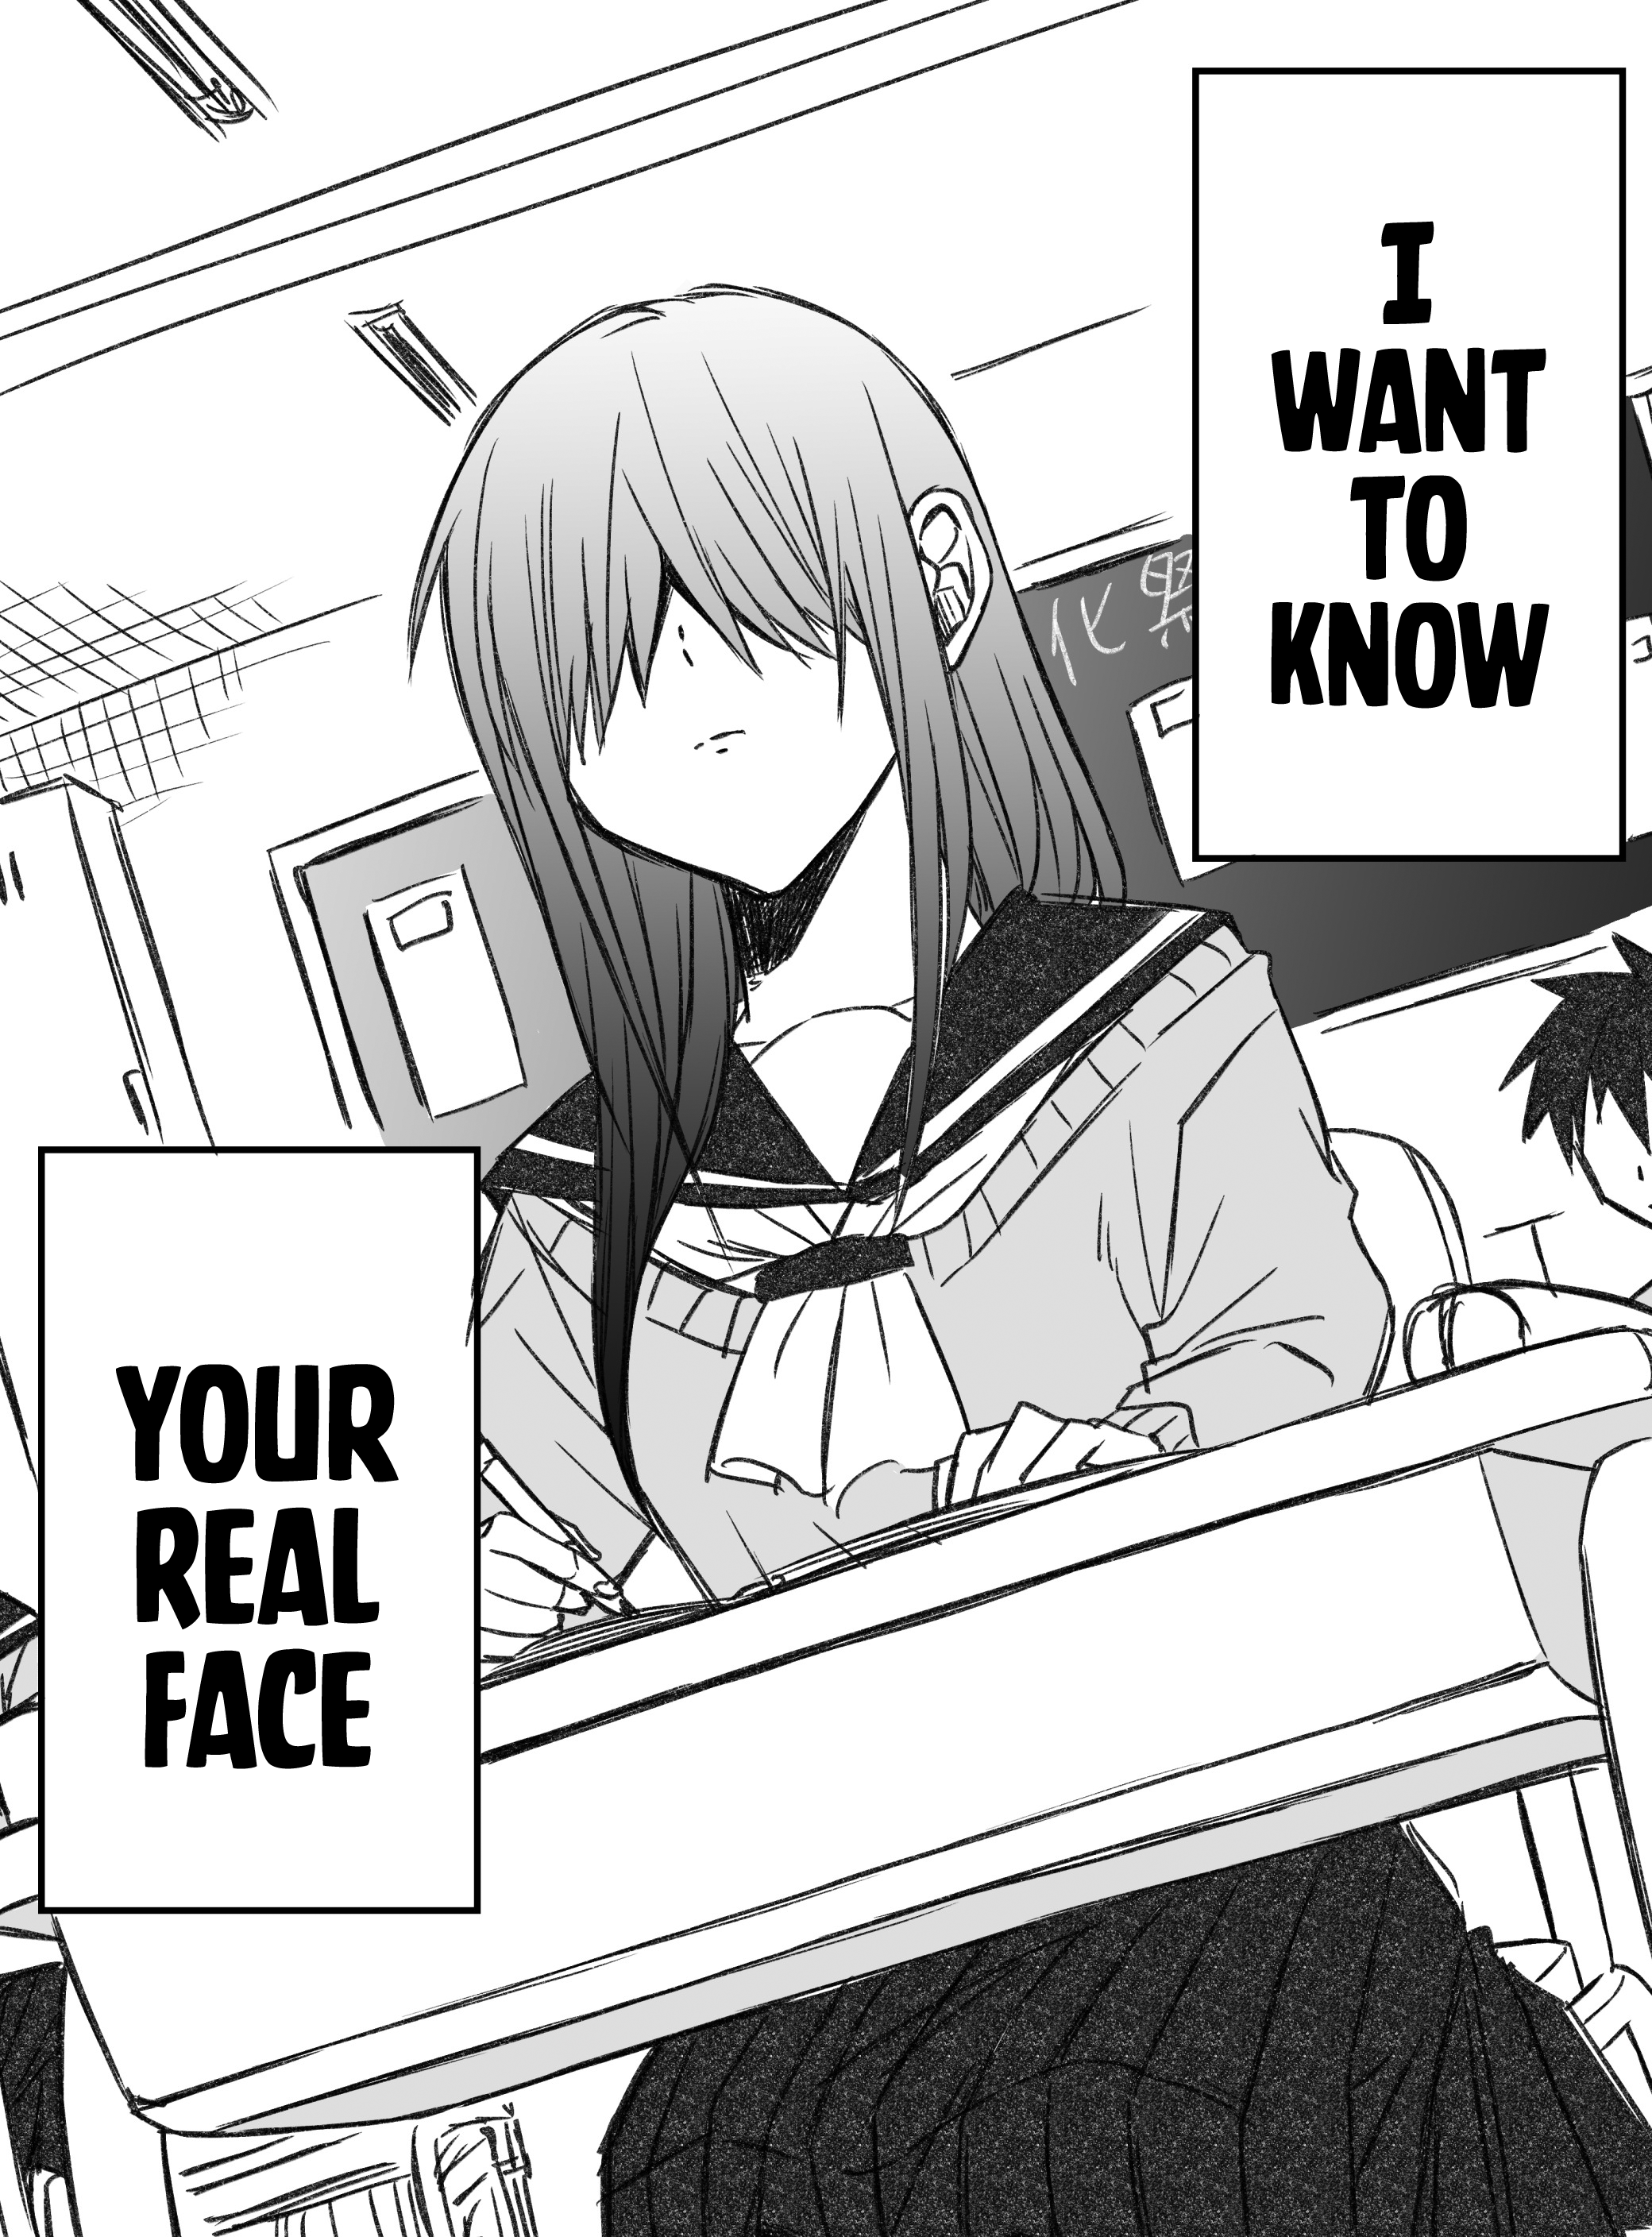 I Want to Know your Real Face (Pre-Serialization) manga